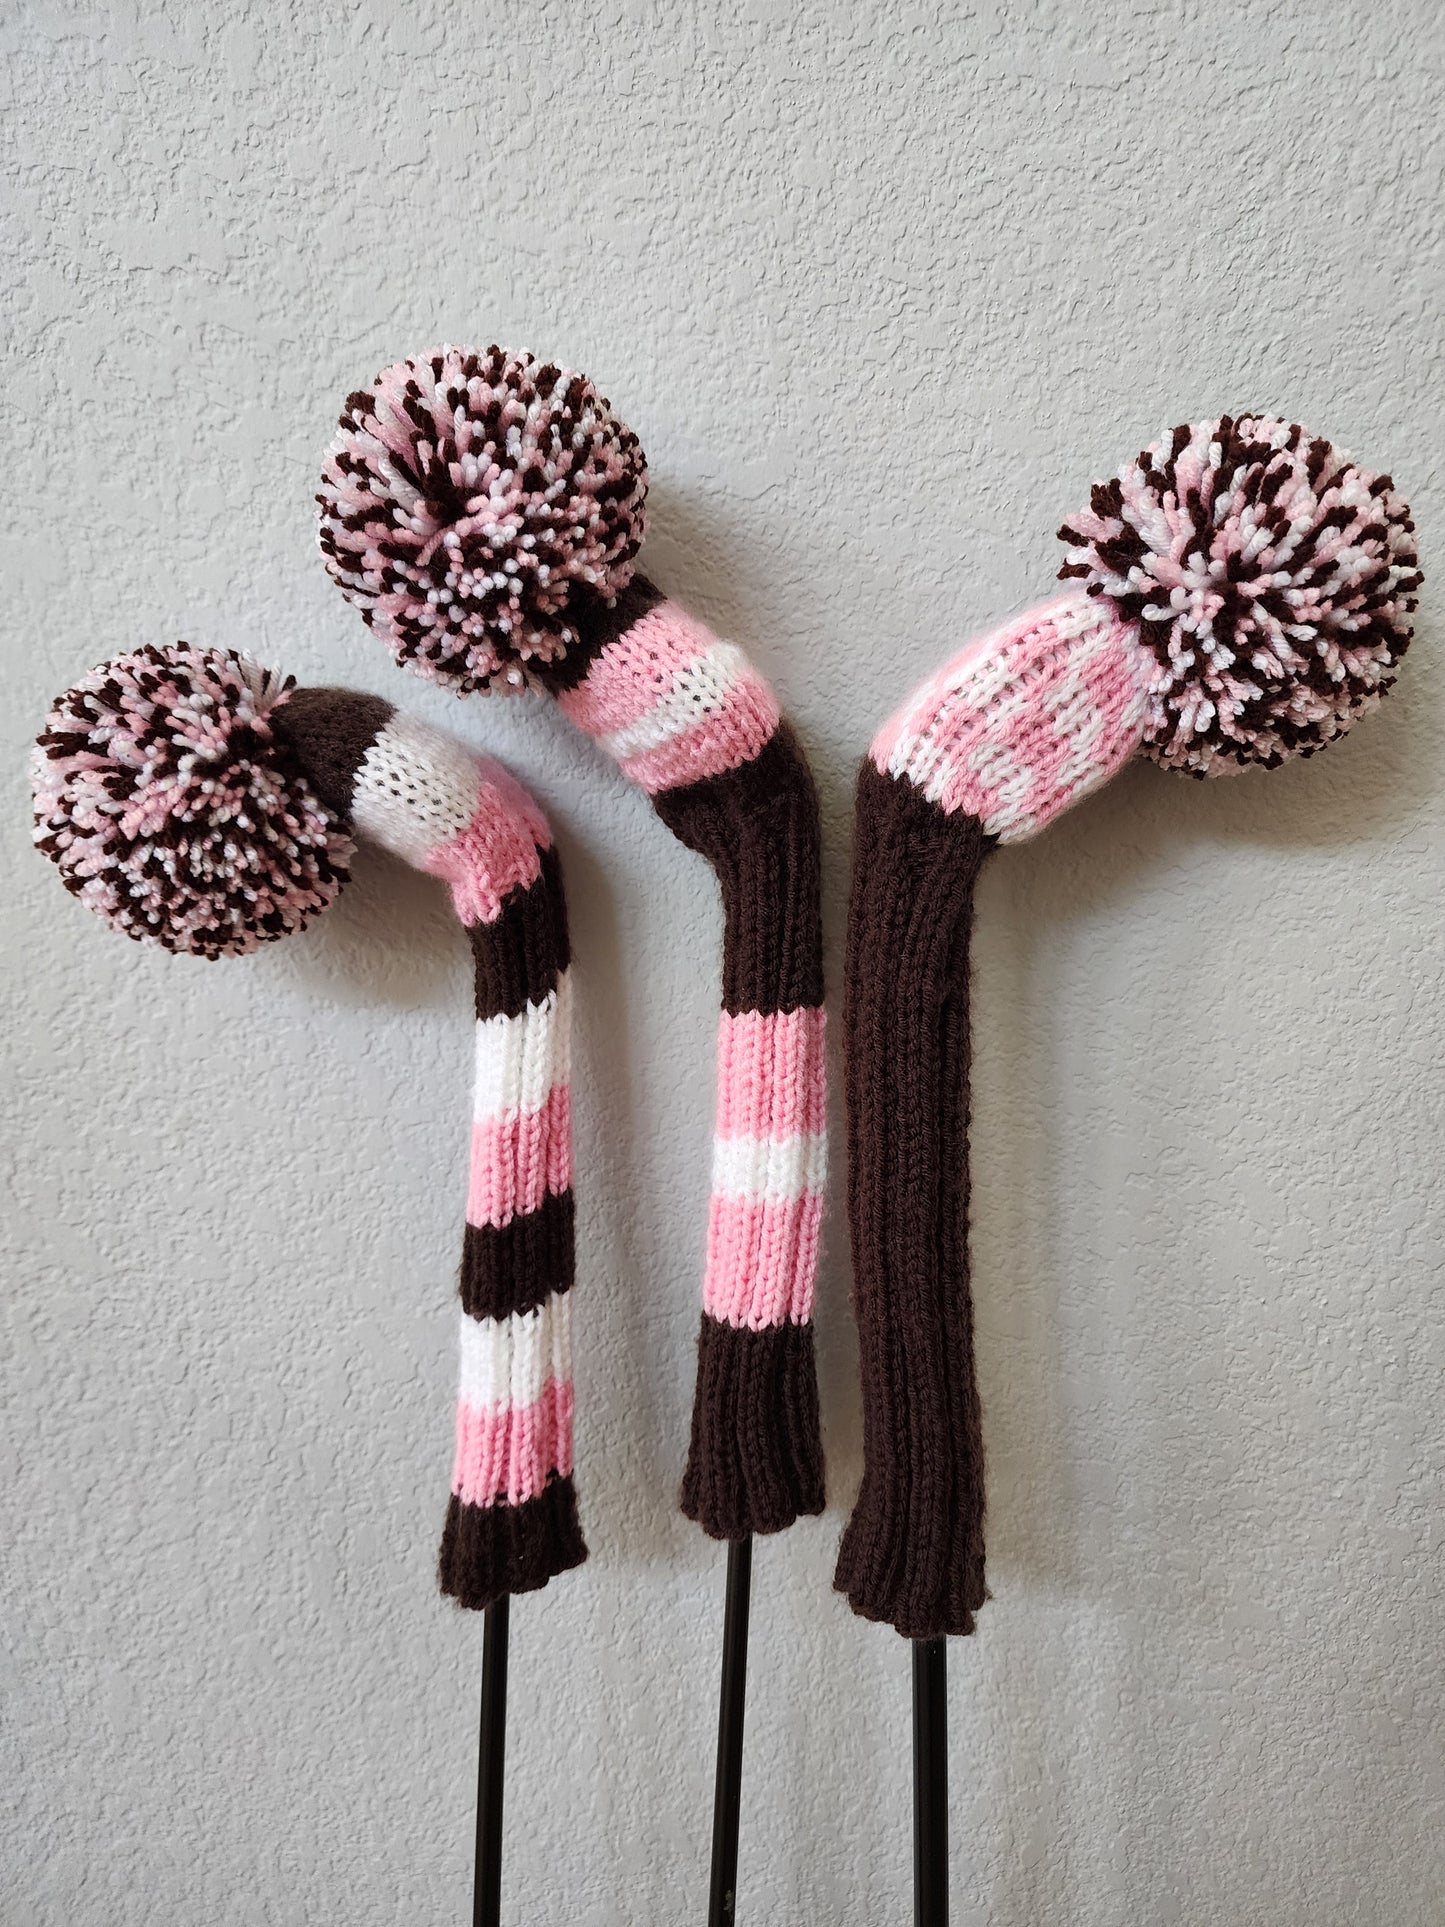 Three Golf Club Head Covers Retro-Vintage Brown, Pink & White with Pom Poms for Drivers, Woods